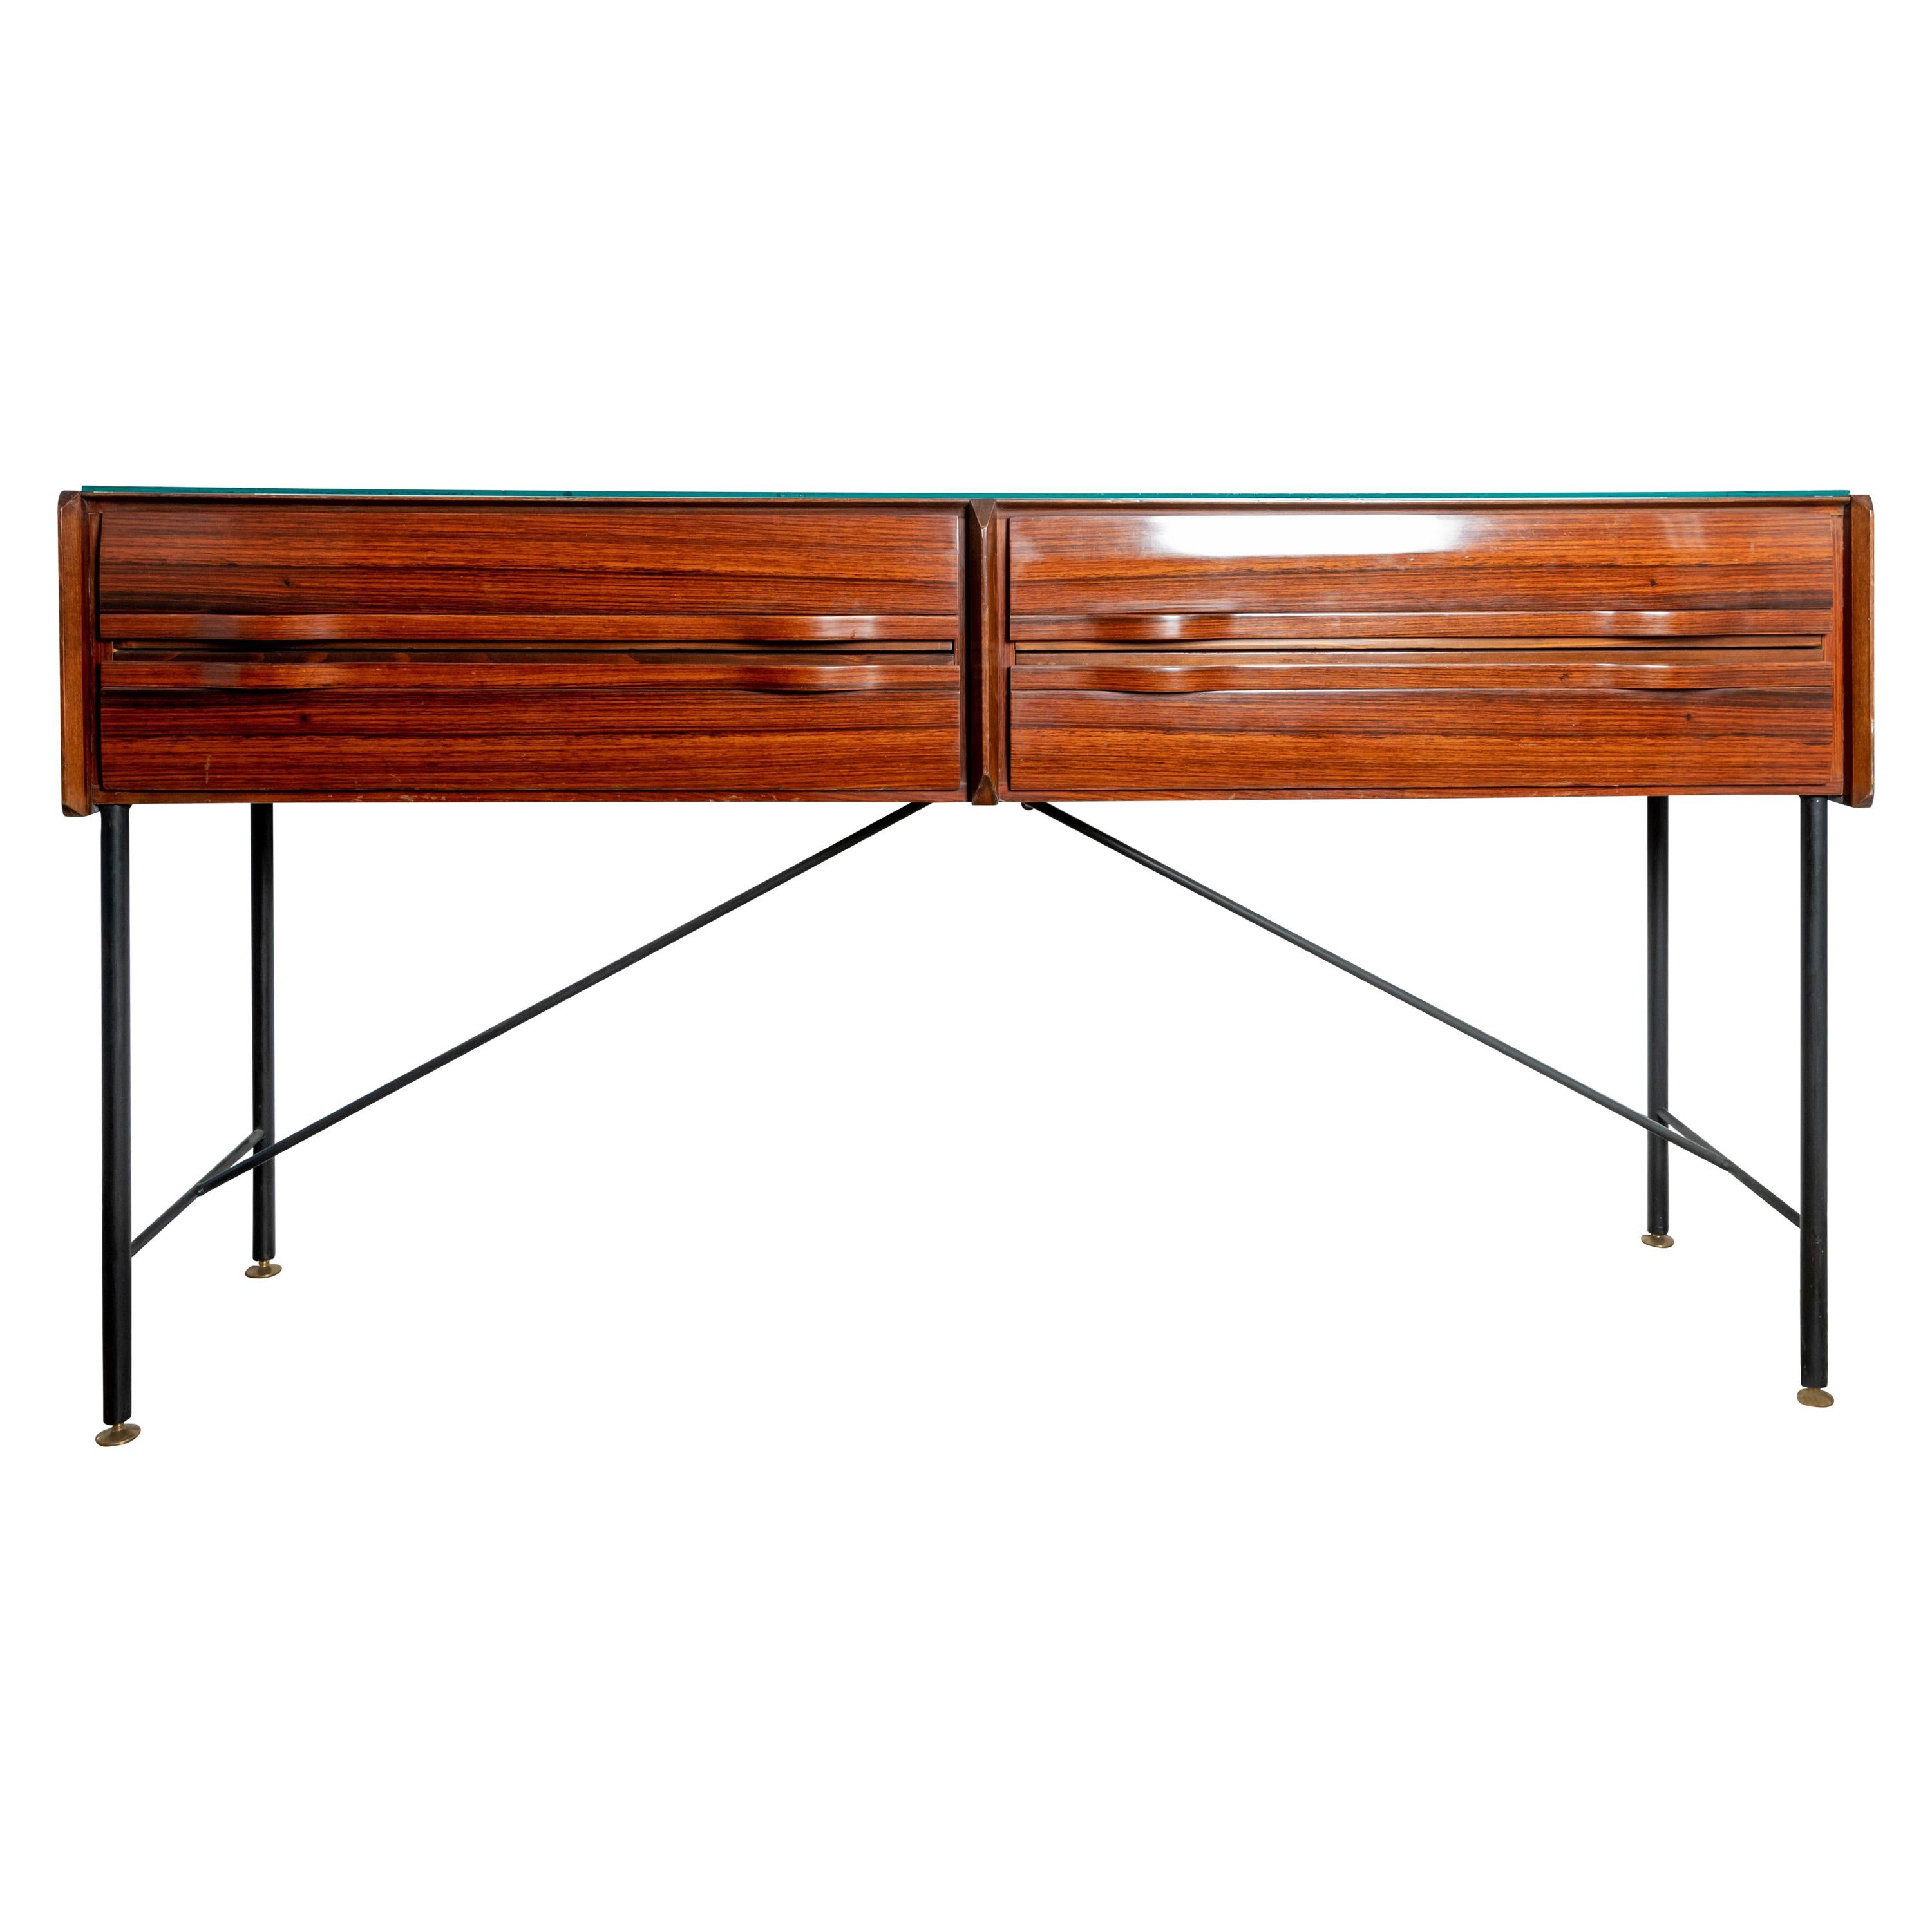 Rectangular Rosewood Four Drawer Sideboard/Console with Blackened Iron Supports For Sale